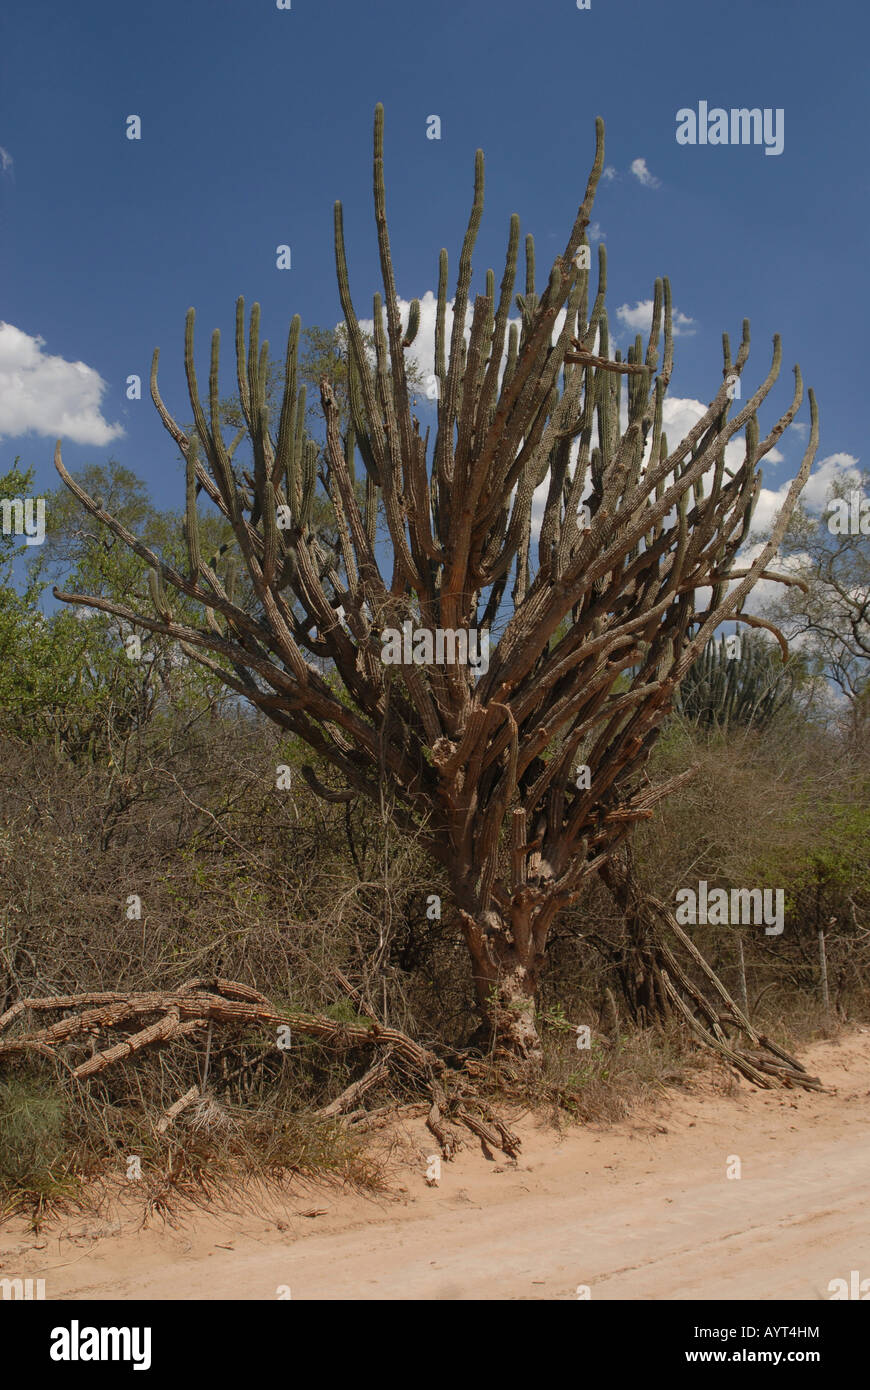 Cactus tree (Cereus sp.), arid landscape in front of a dark blue sky, Gran Chaco, Paraguay, South America Stock Photo